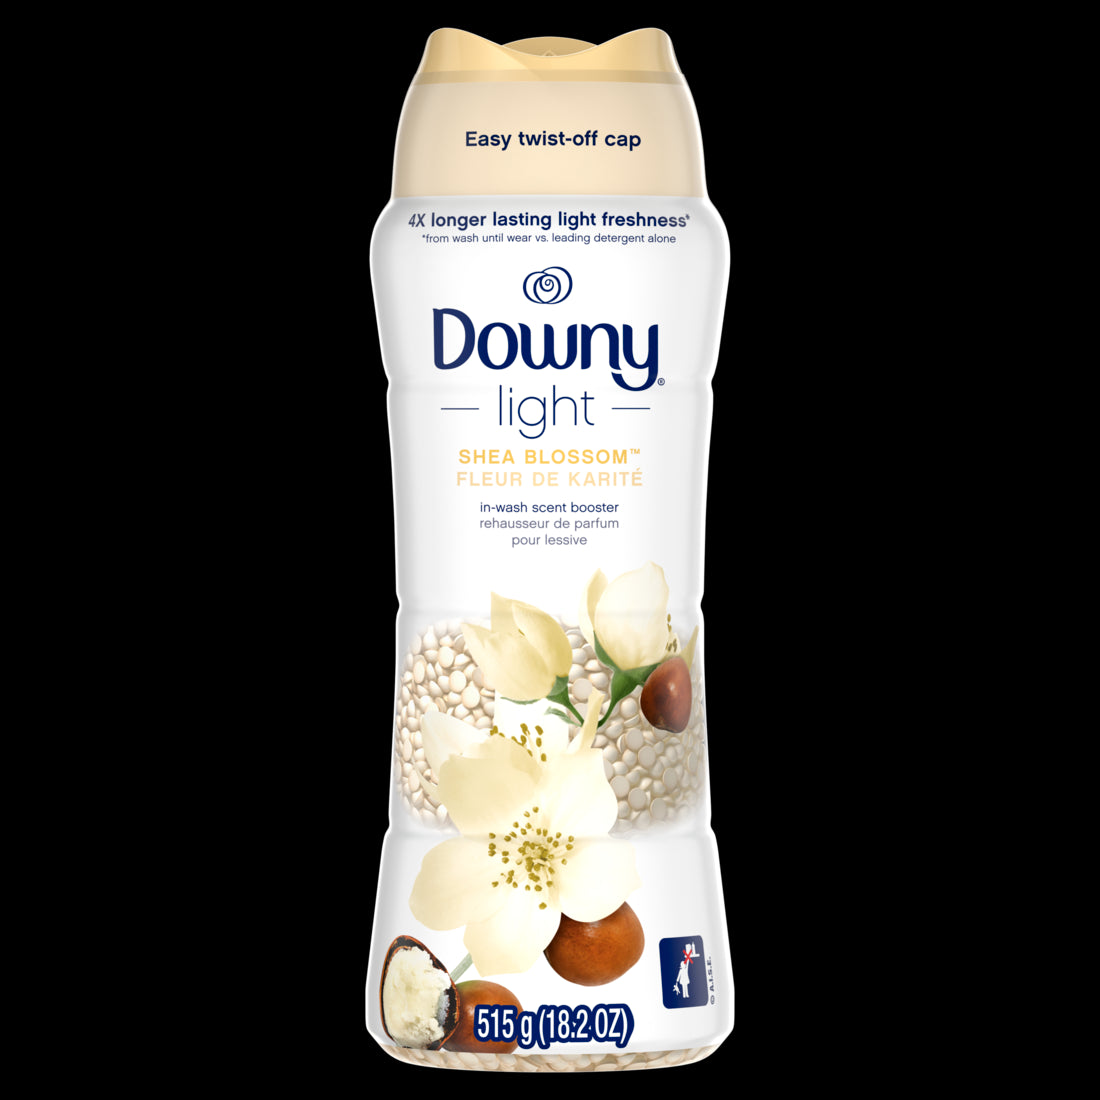 Downy Light Laundry Scent Booster Beads for Washer Shea Blossom with No Heavy Perfumes-18.2oz/4pk